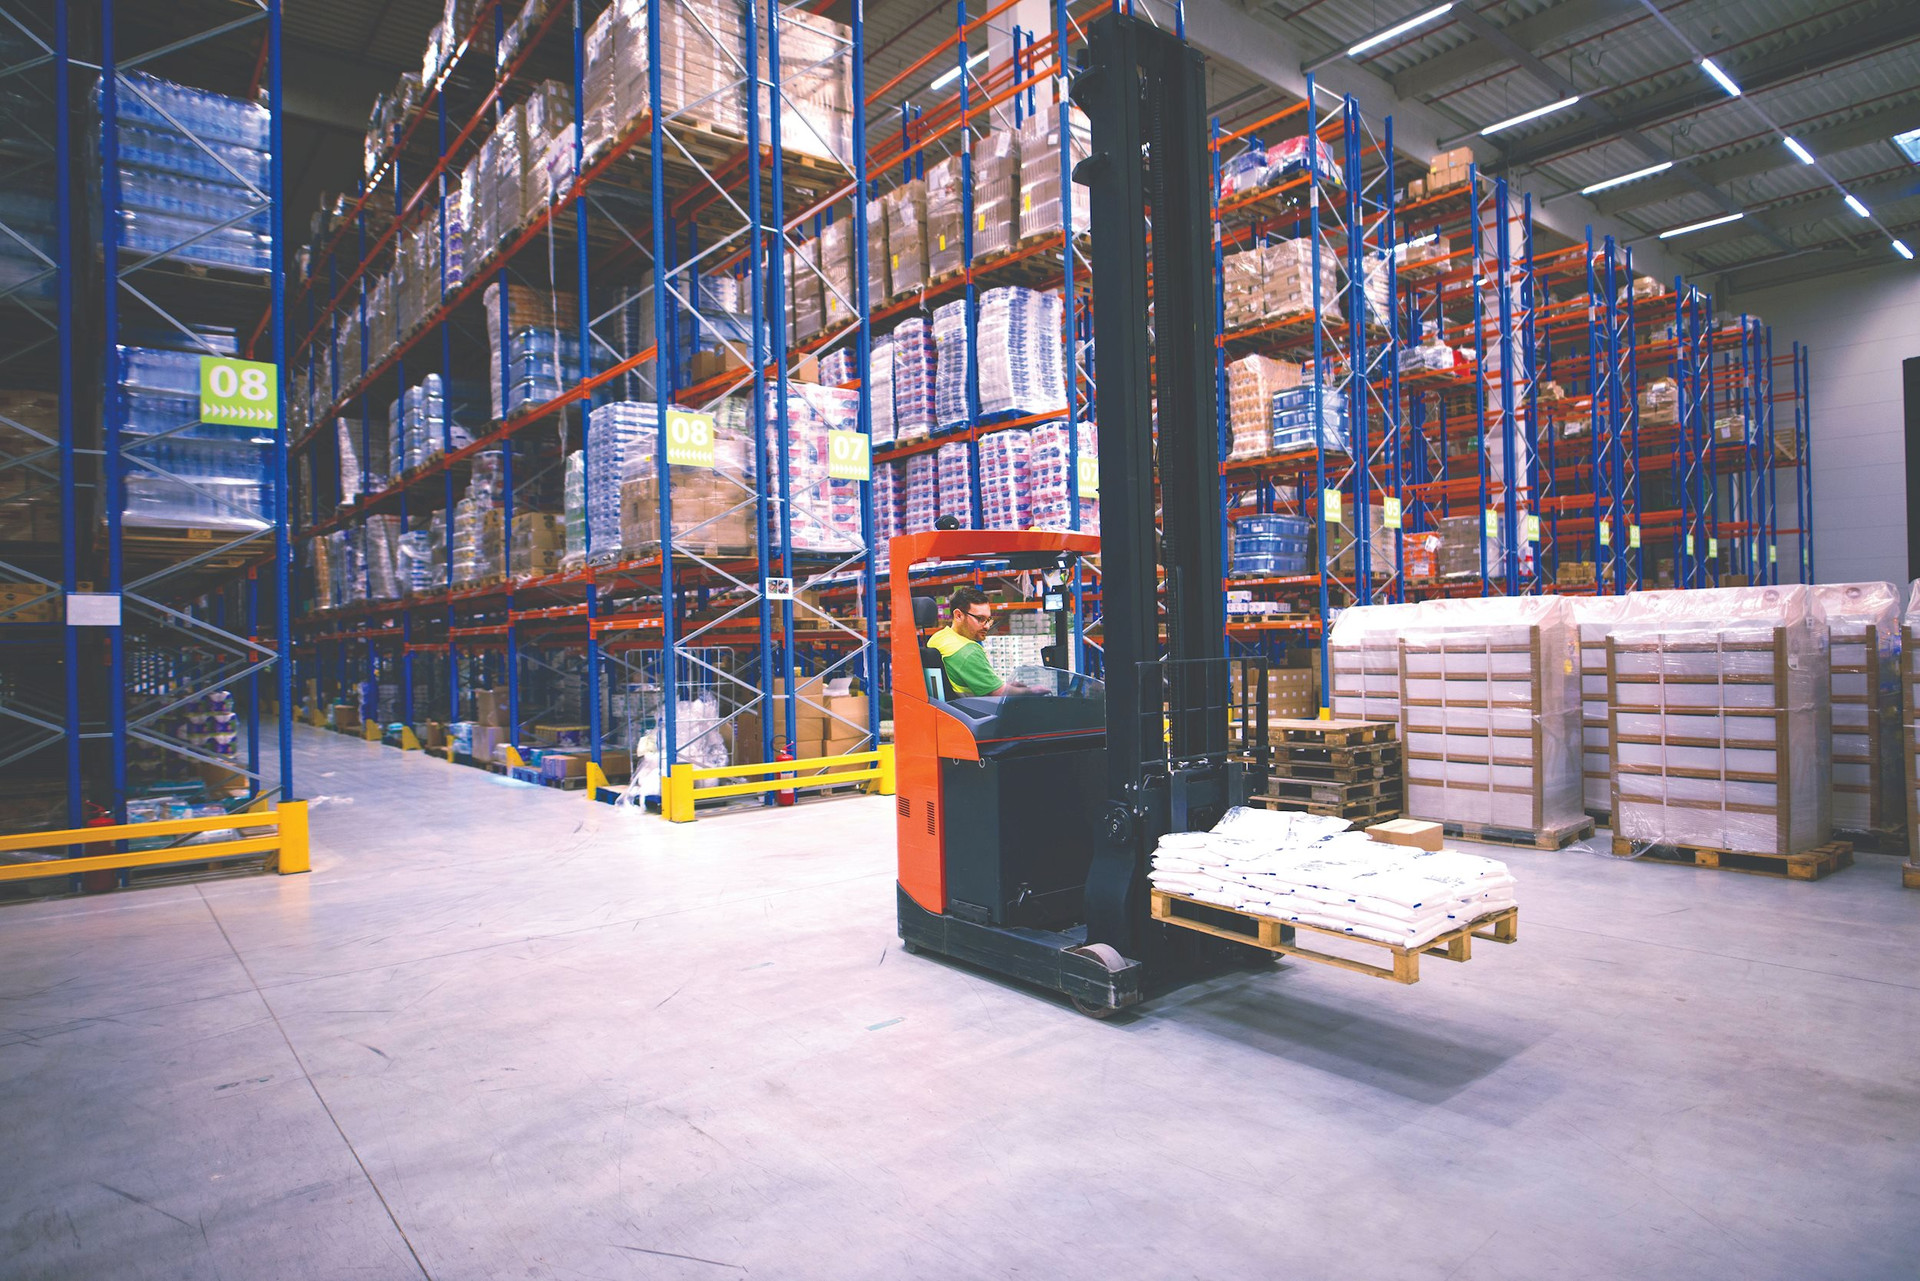 worker-operating-forklift-machine-relocating-goods-large-warehouse-center-compressed.jpeg